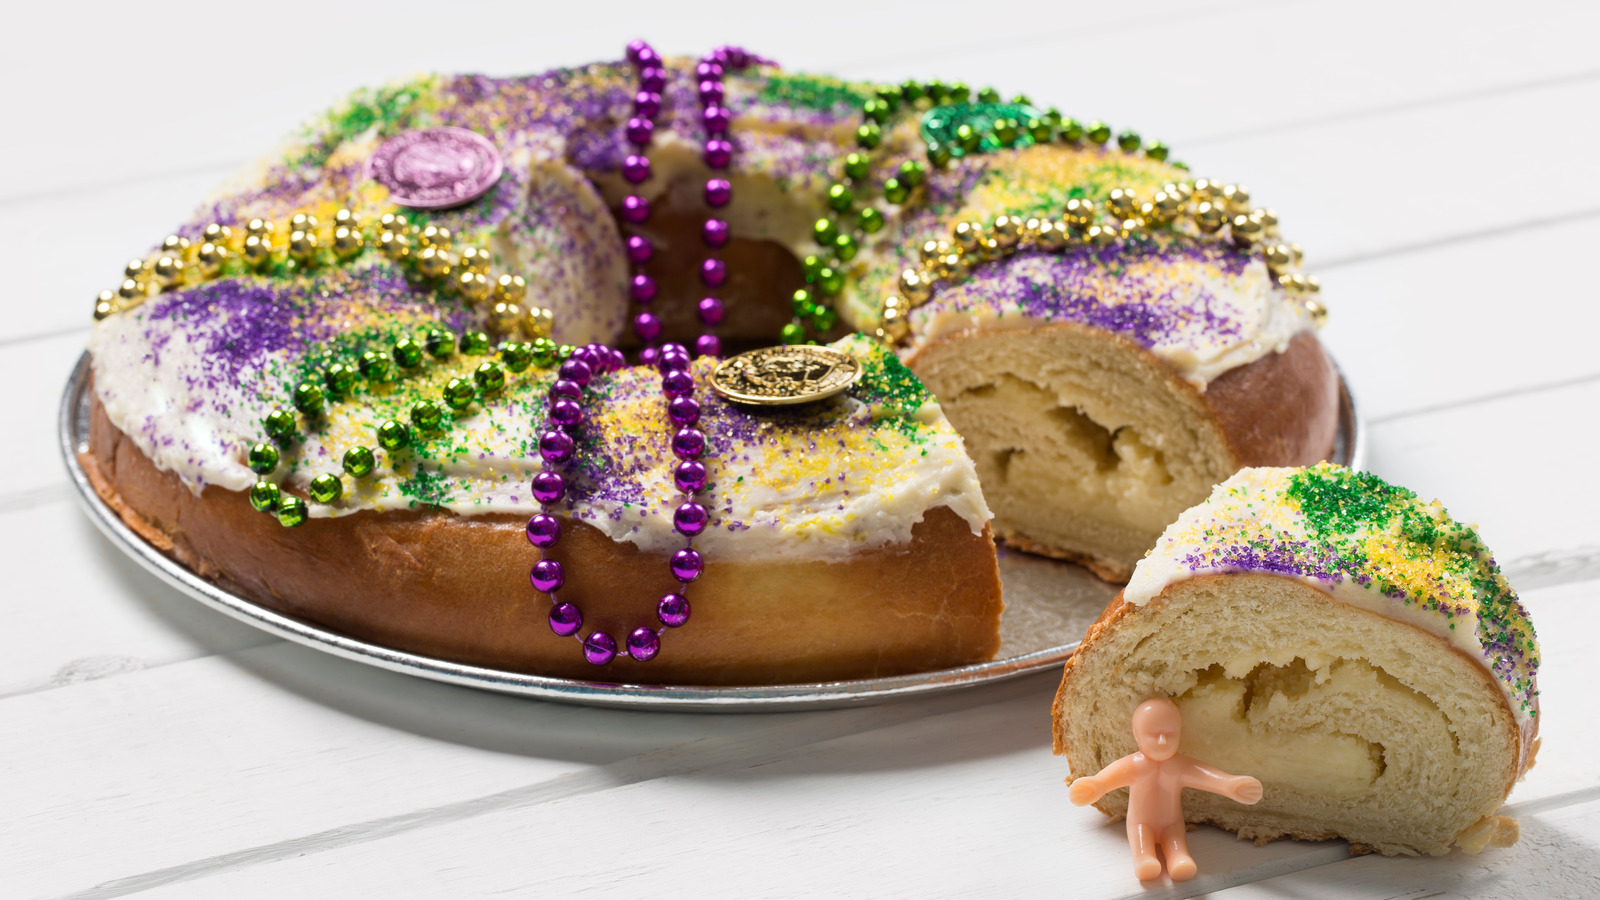 What Are King Cakes And When Do You Eat Them?